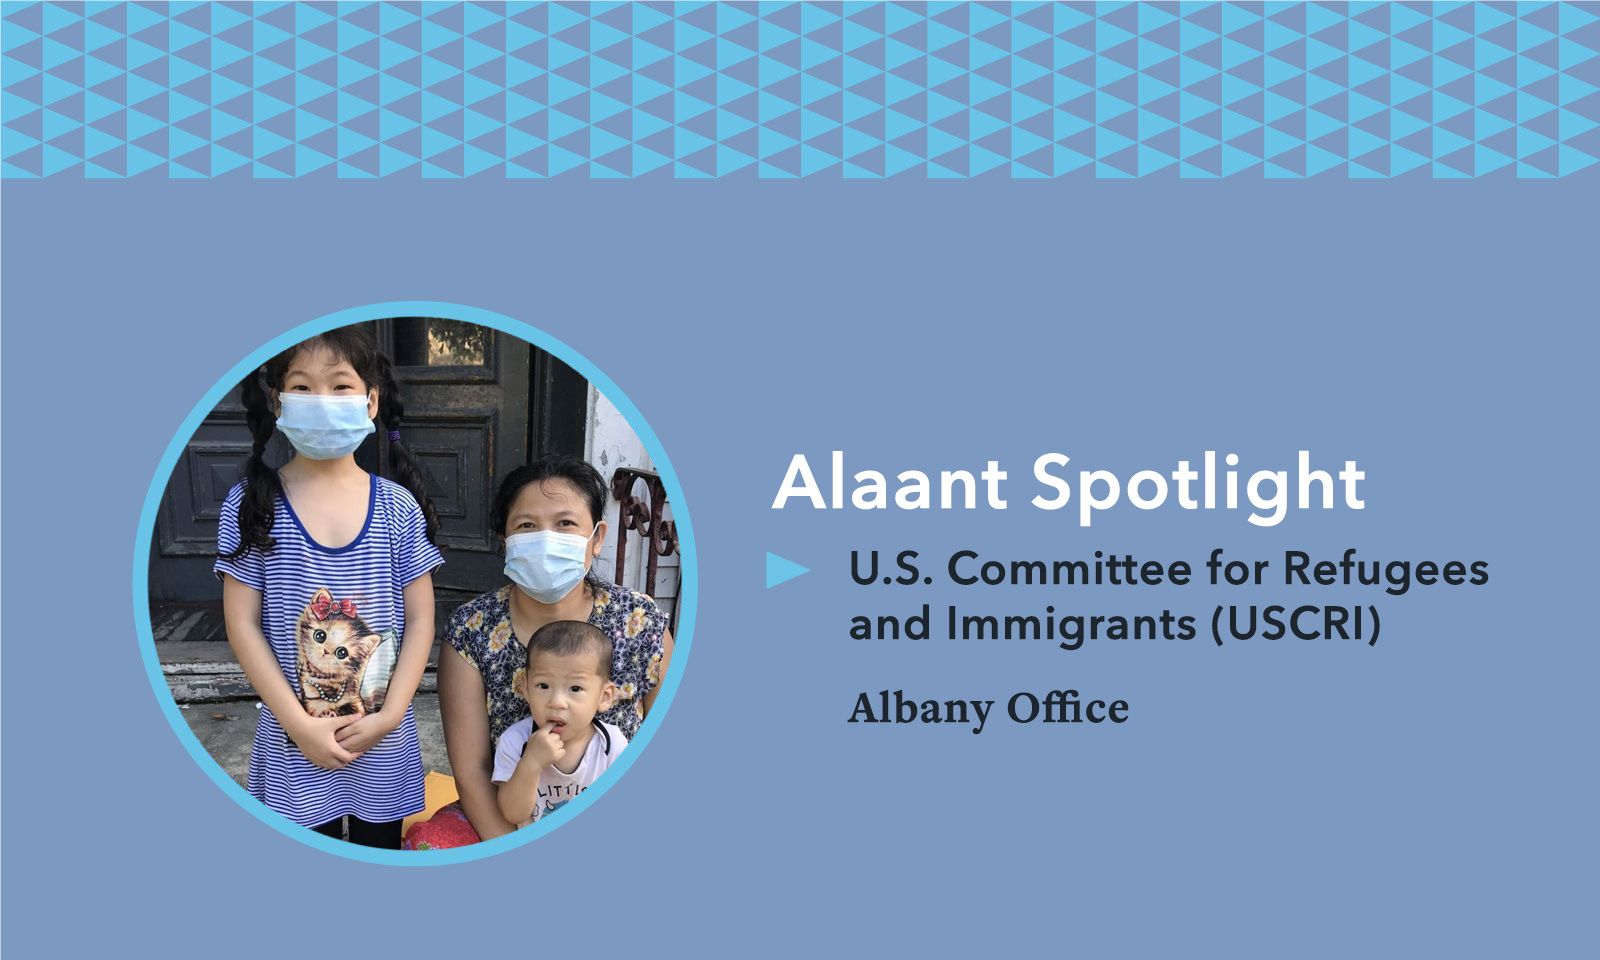 Alaant Spotlight U.S. Committee for Refugees and Immigrants (USCRI Albany)